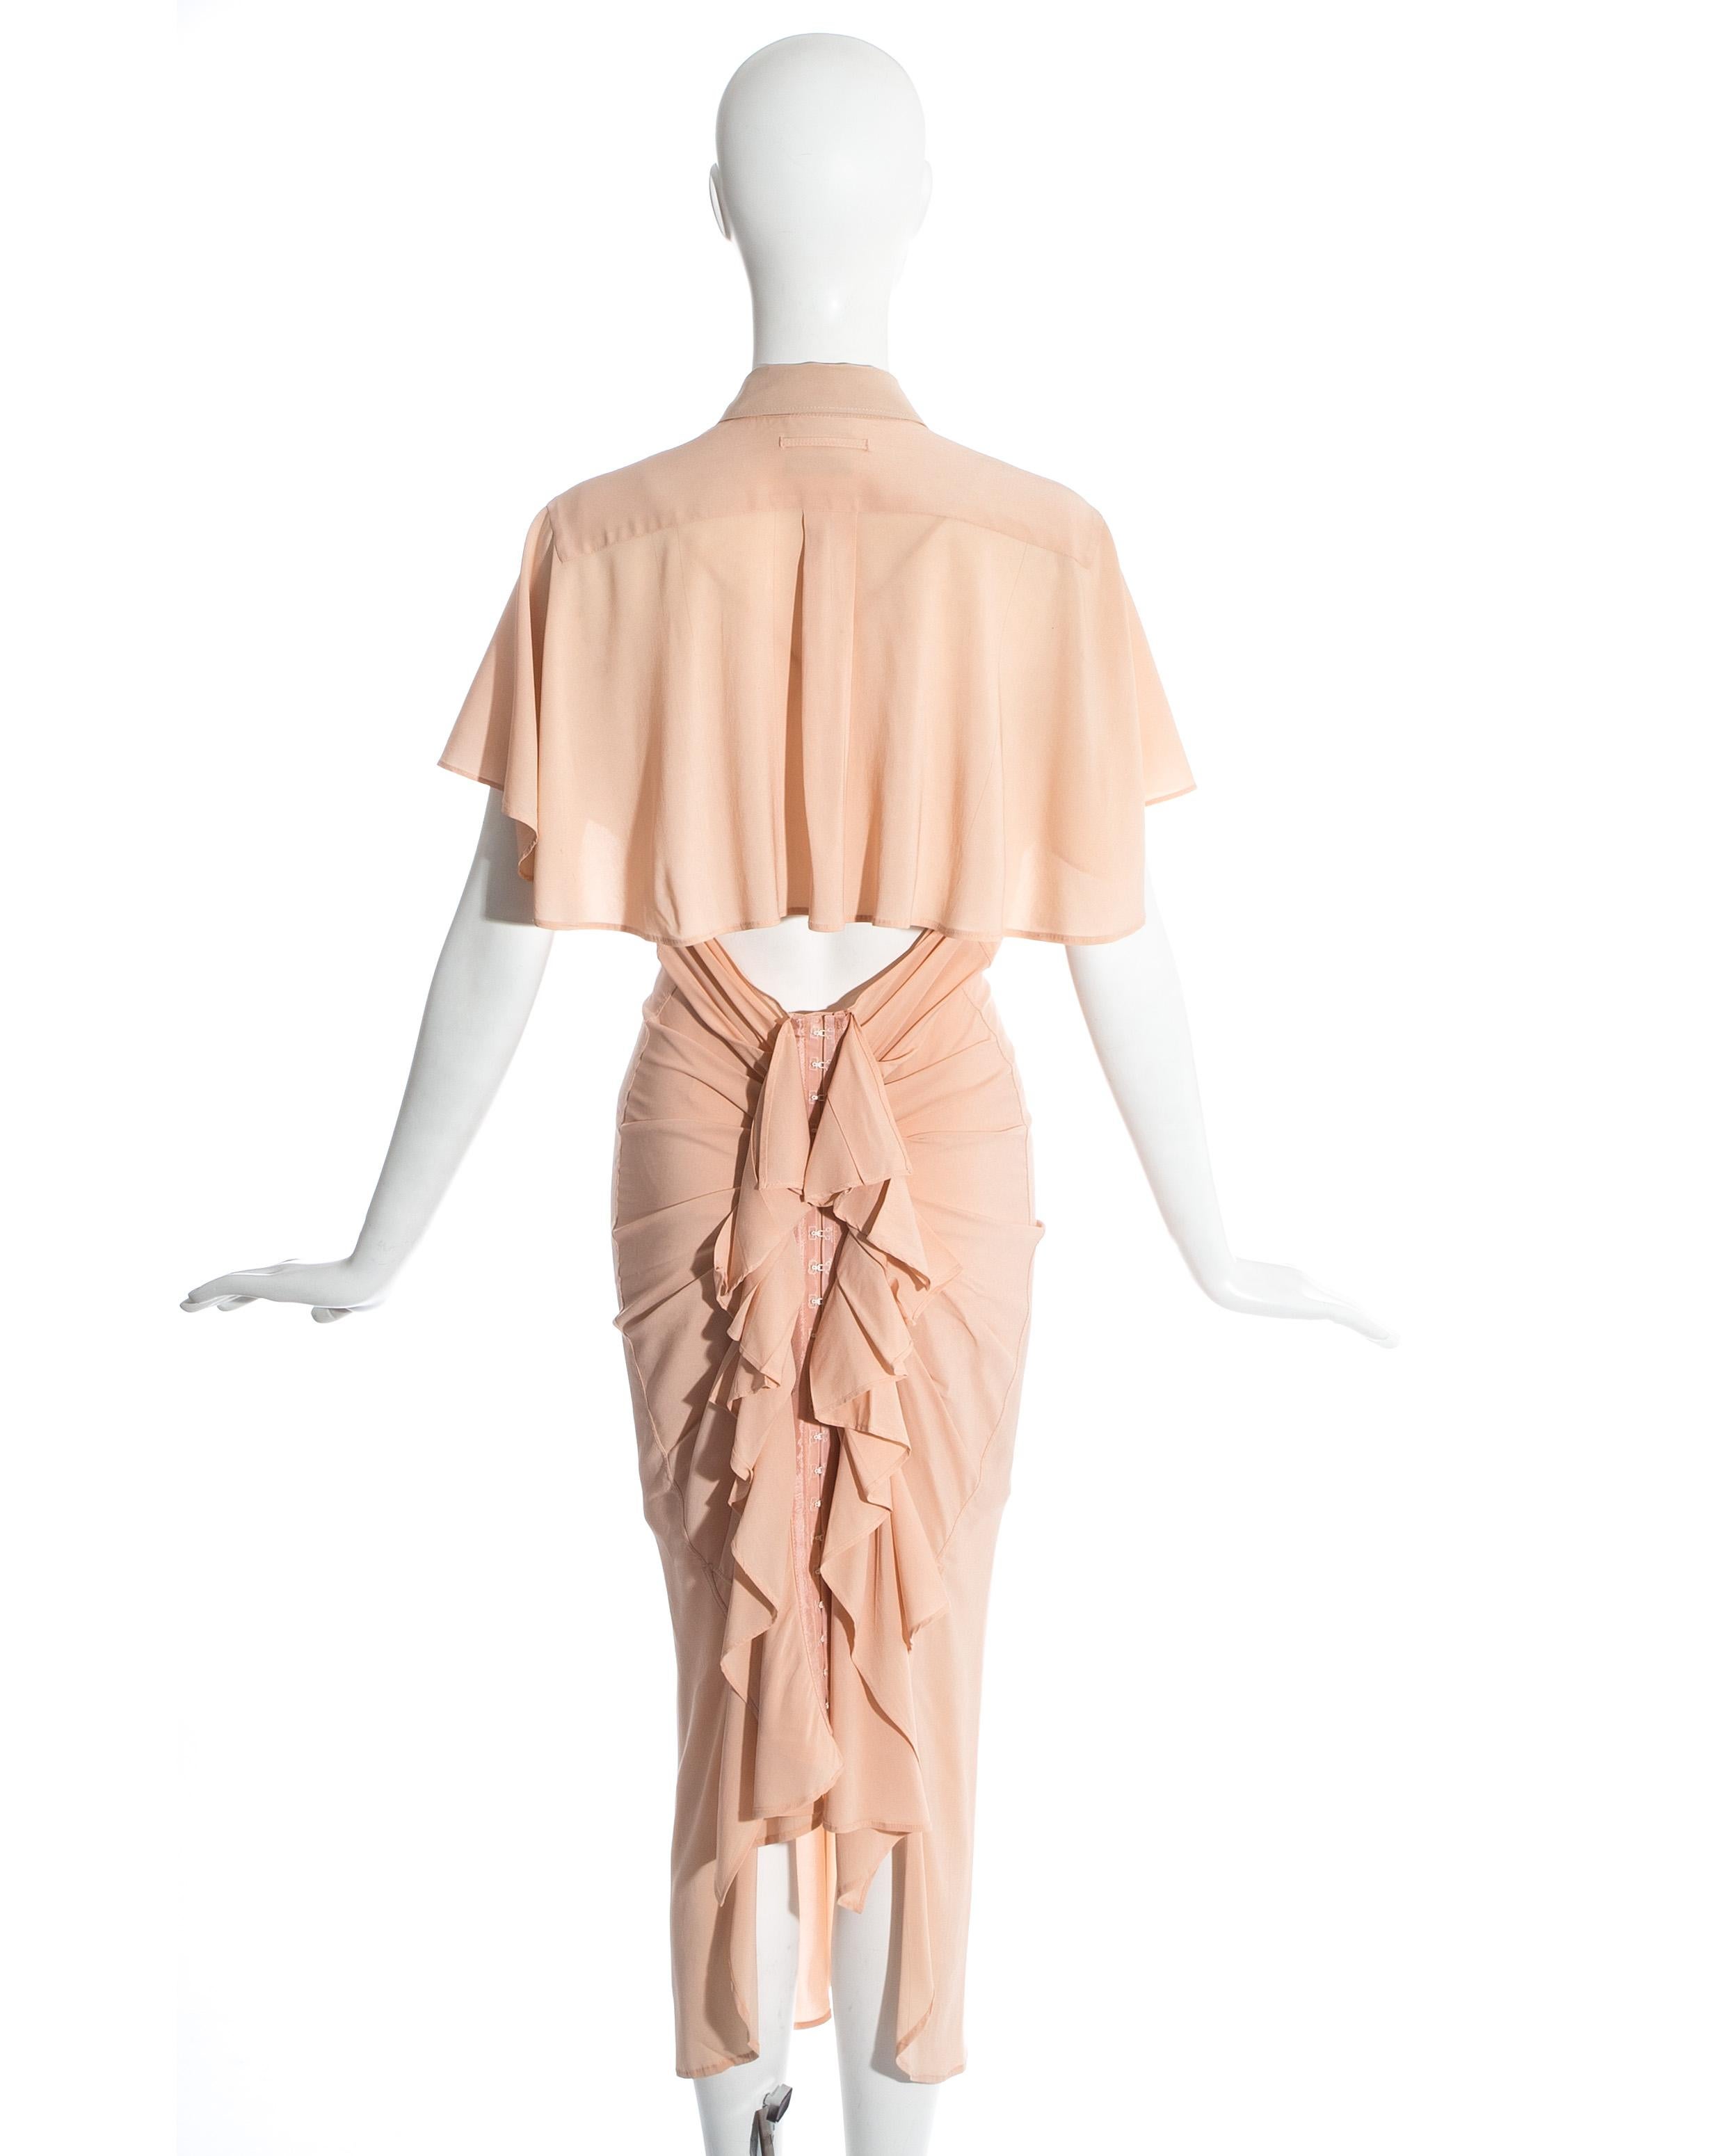 Jean Paul Gaultier peach shirt dress with caplet, open back, and corset skirt with ruffles. Comes with matching slip dress.

Spring-Summer 2005